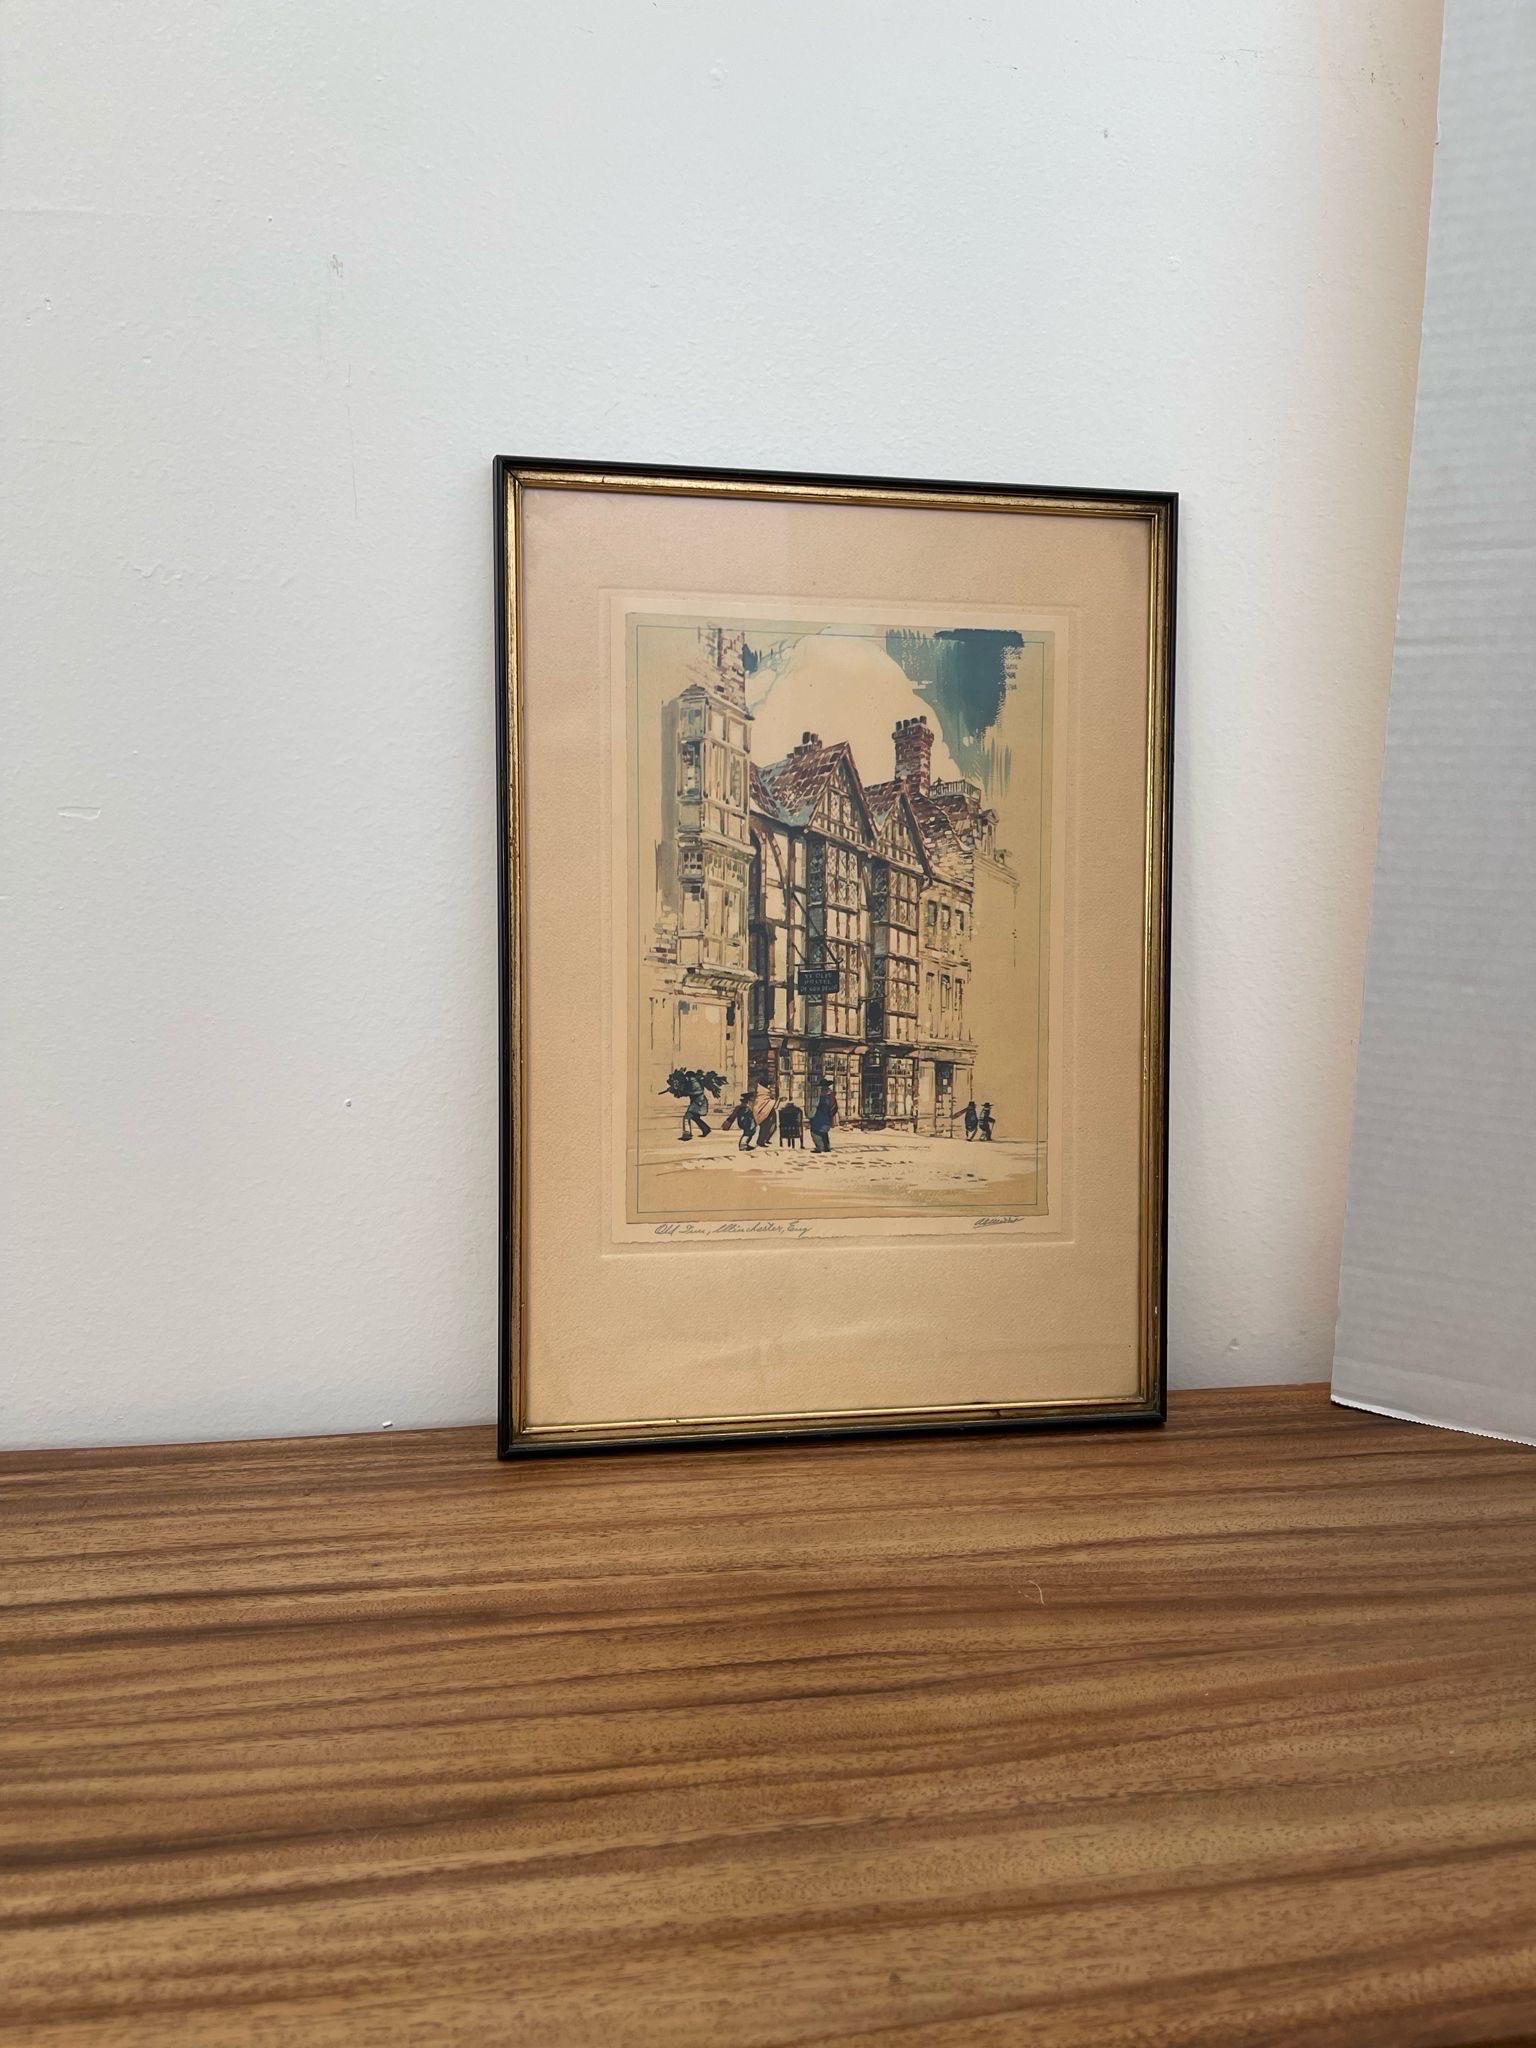 Reproduction of A.F. Mettel’s Original Watercolor. Back of the Artwork has Information about the History of the Piece. Framed, Matted and Signed. Beautiful Petina and Aging to the paper. Vintage Condition Consistent with Age as